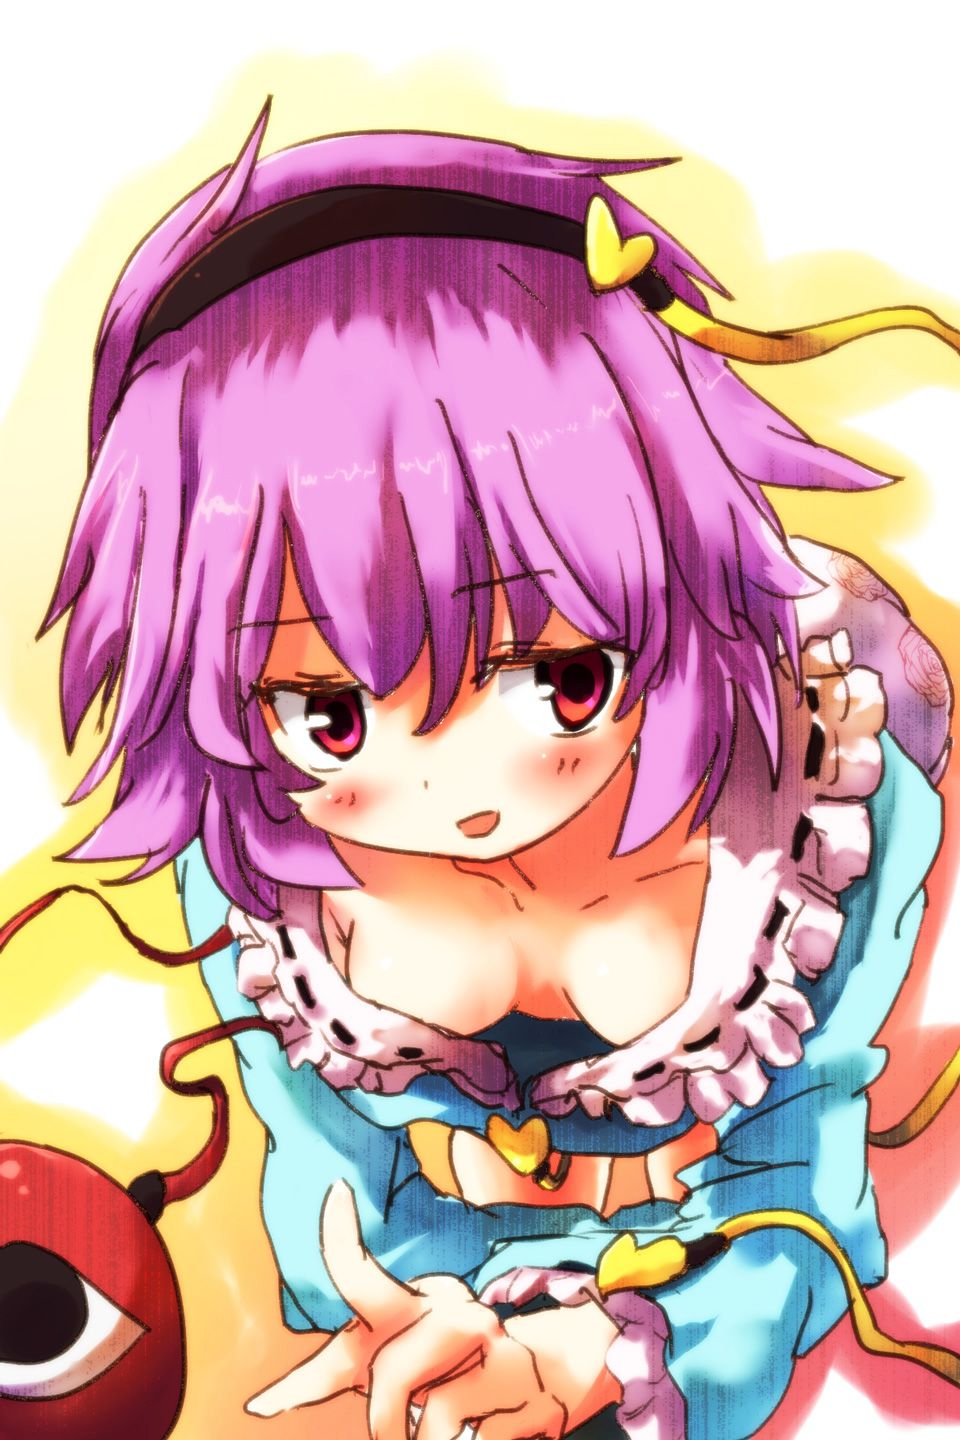 [Touhou] Secondary erotic images of female characters 3 70 photos 59